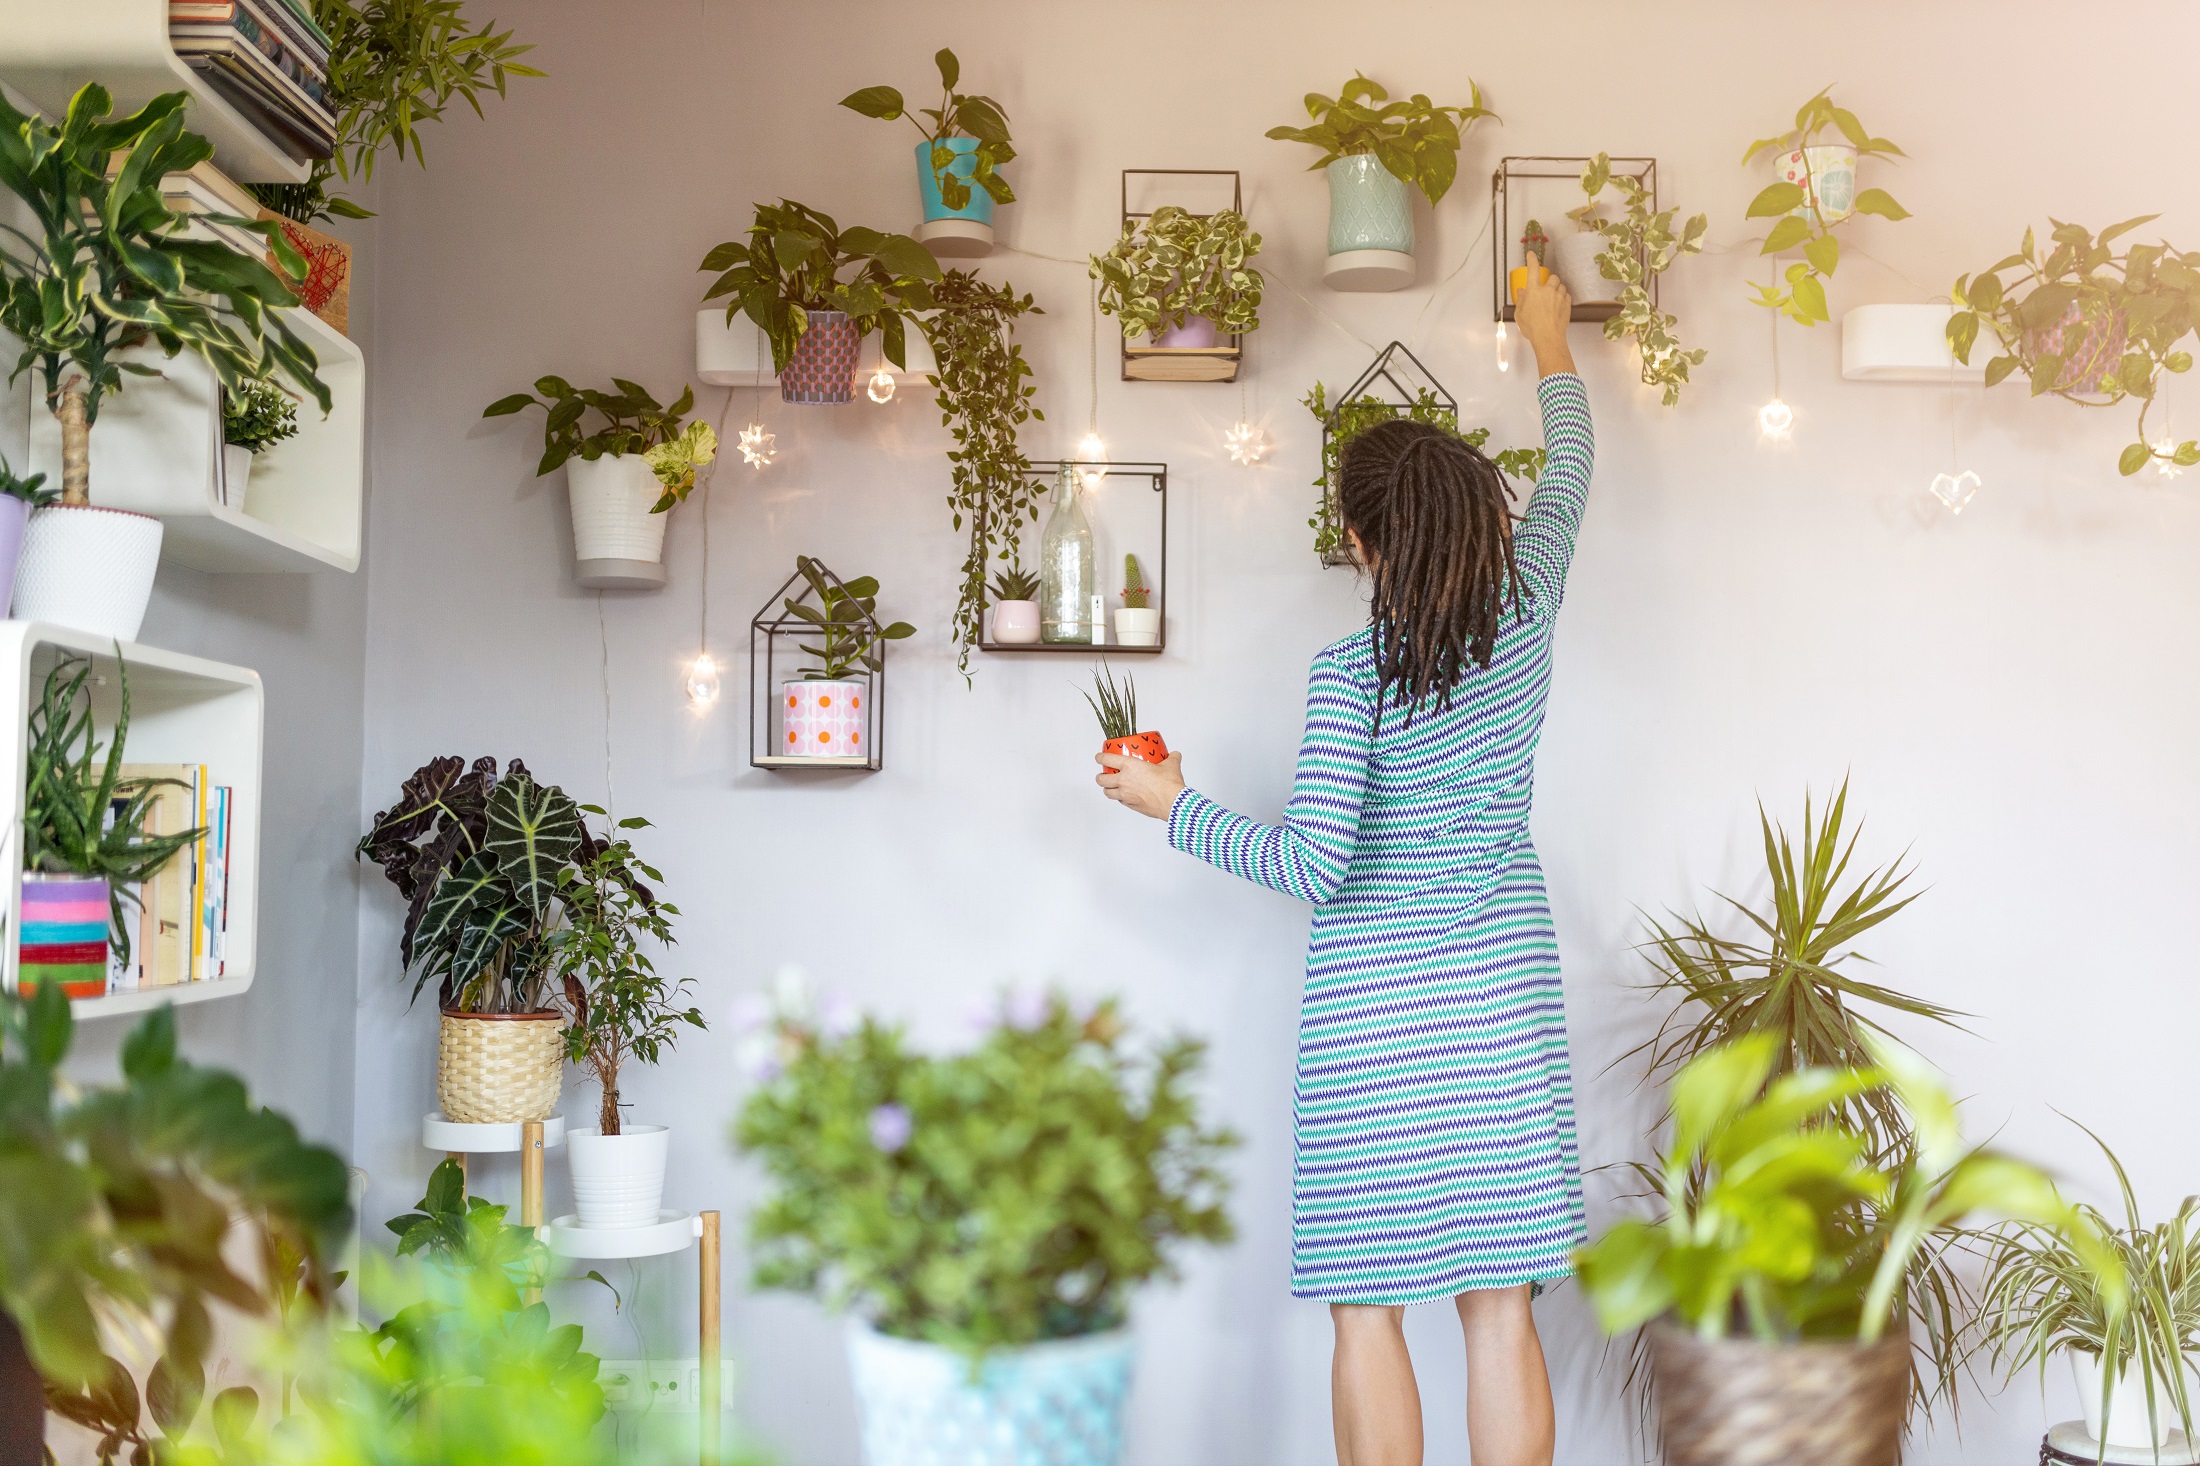 A woman is placing plants on a black frame hanging on the wall